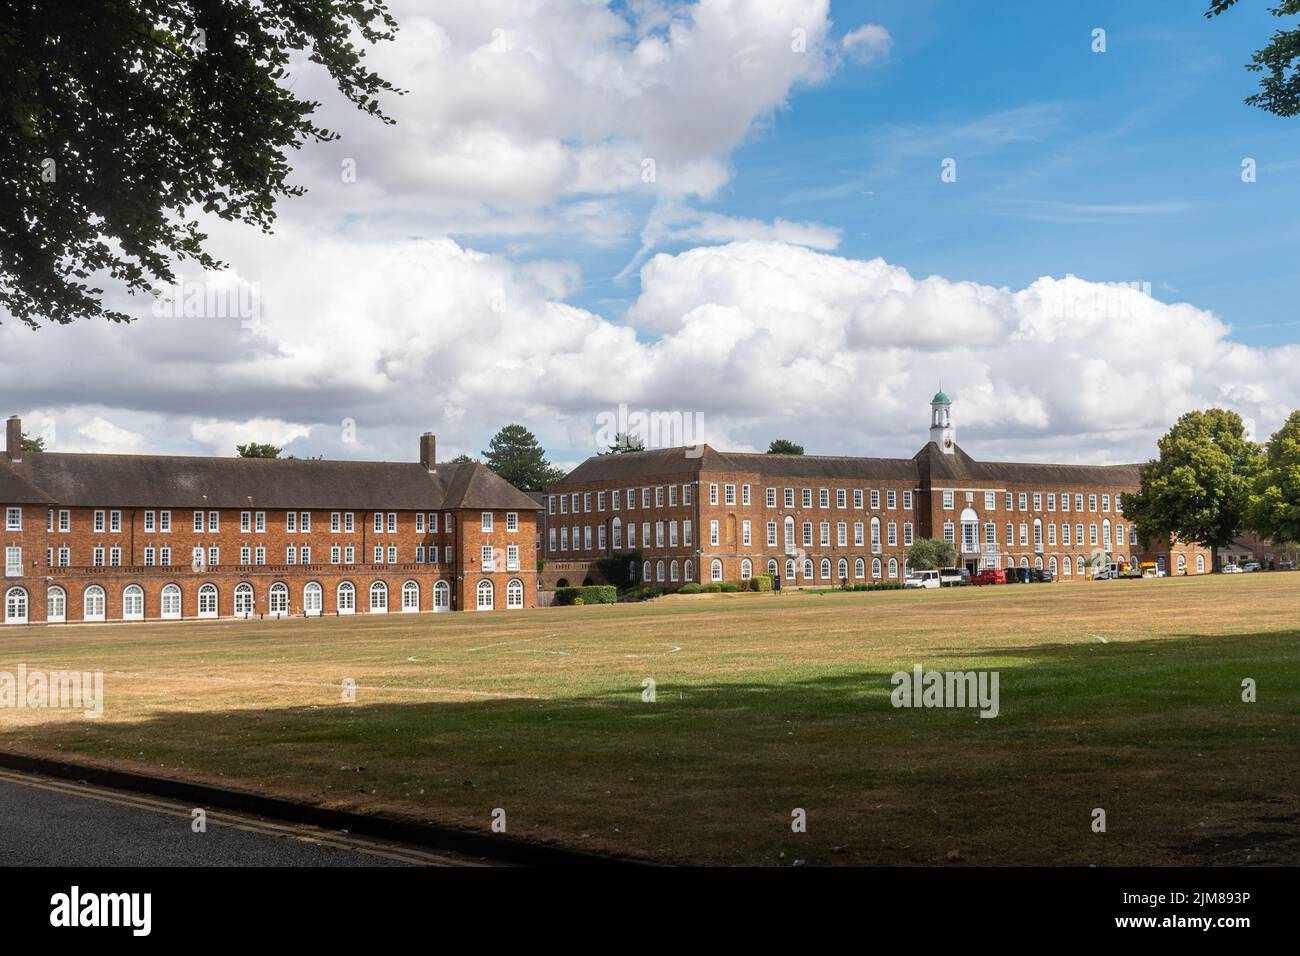 St Swithun's School, an independent day and boarding school in Winchester, Hampshire, England, UK. Stock Photo